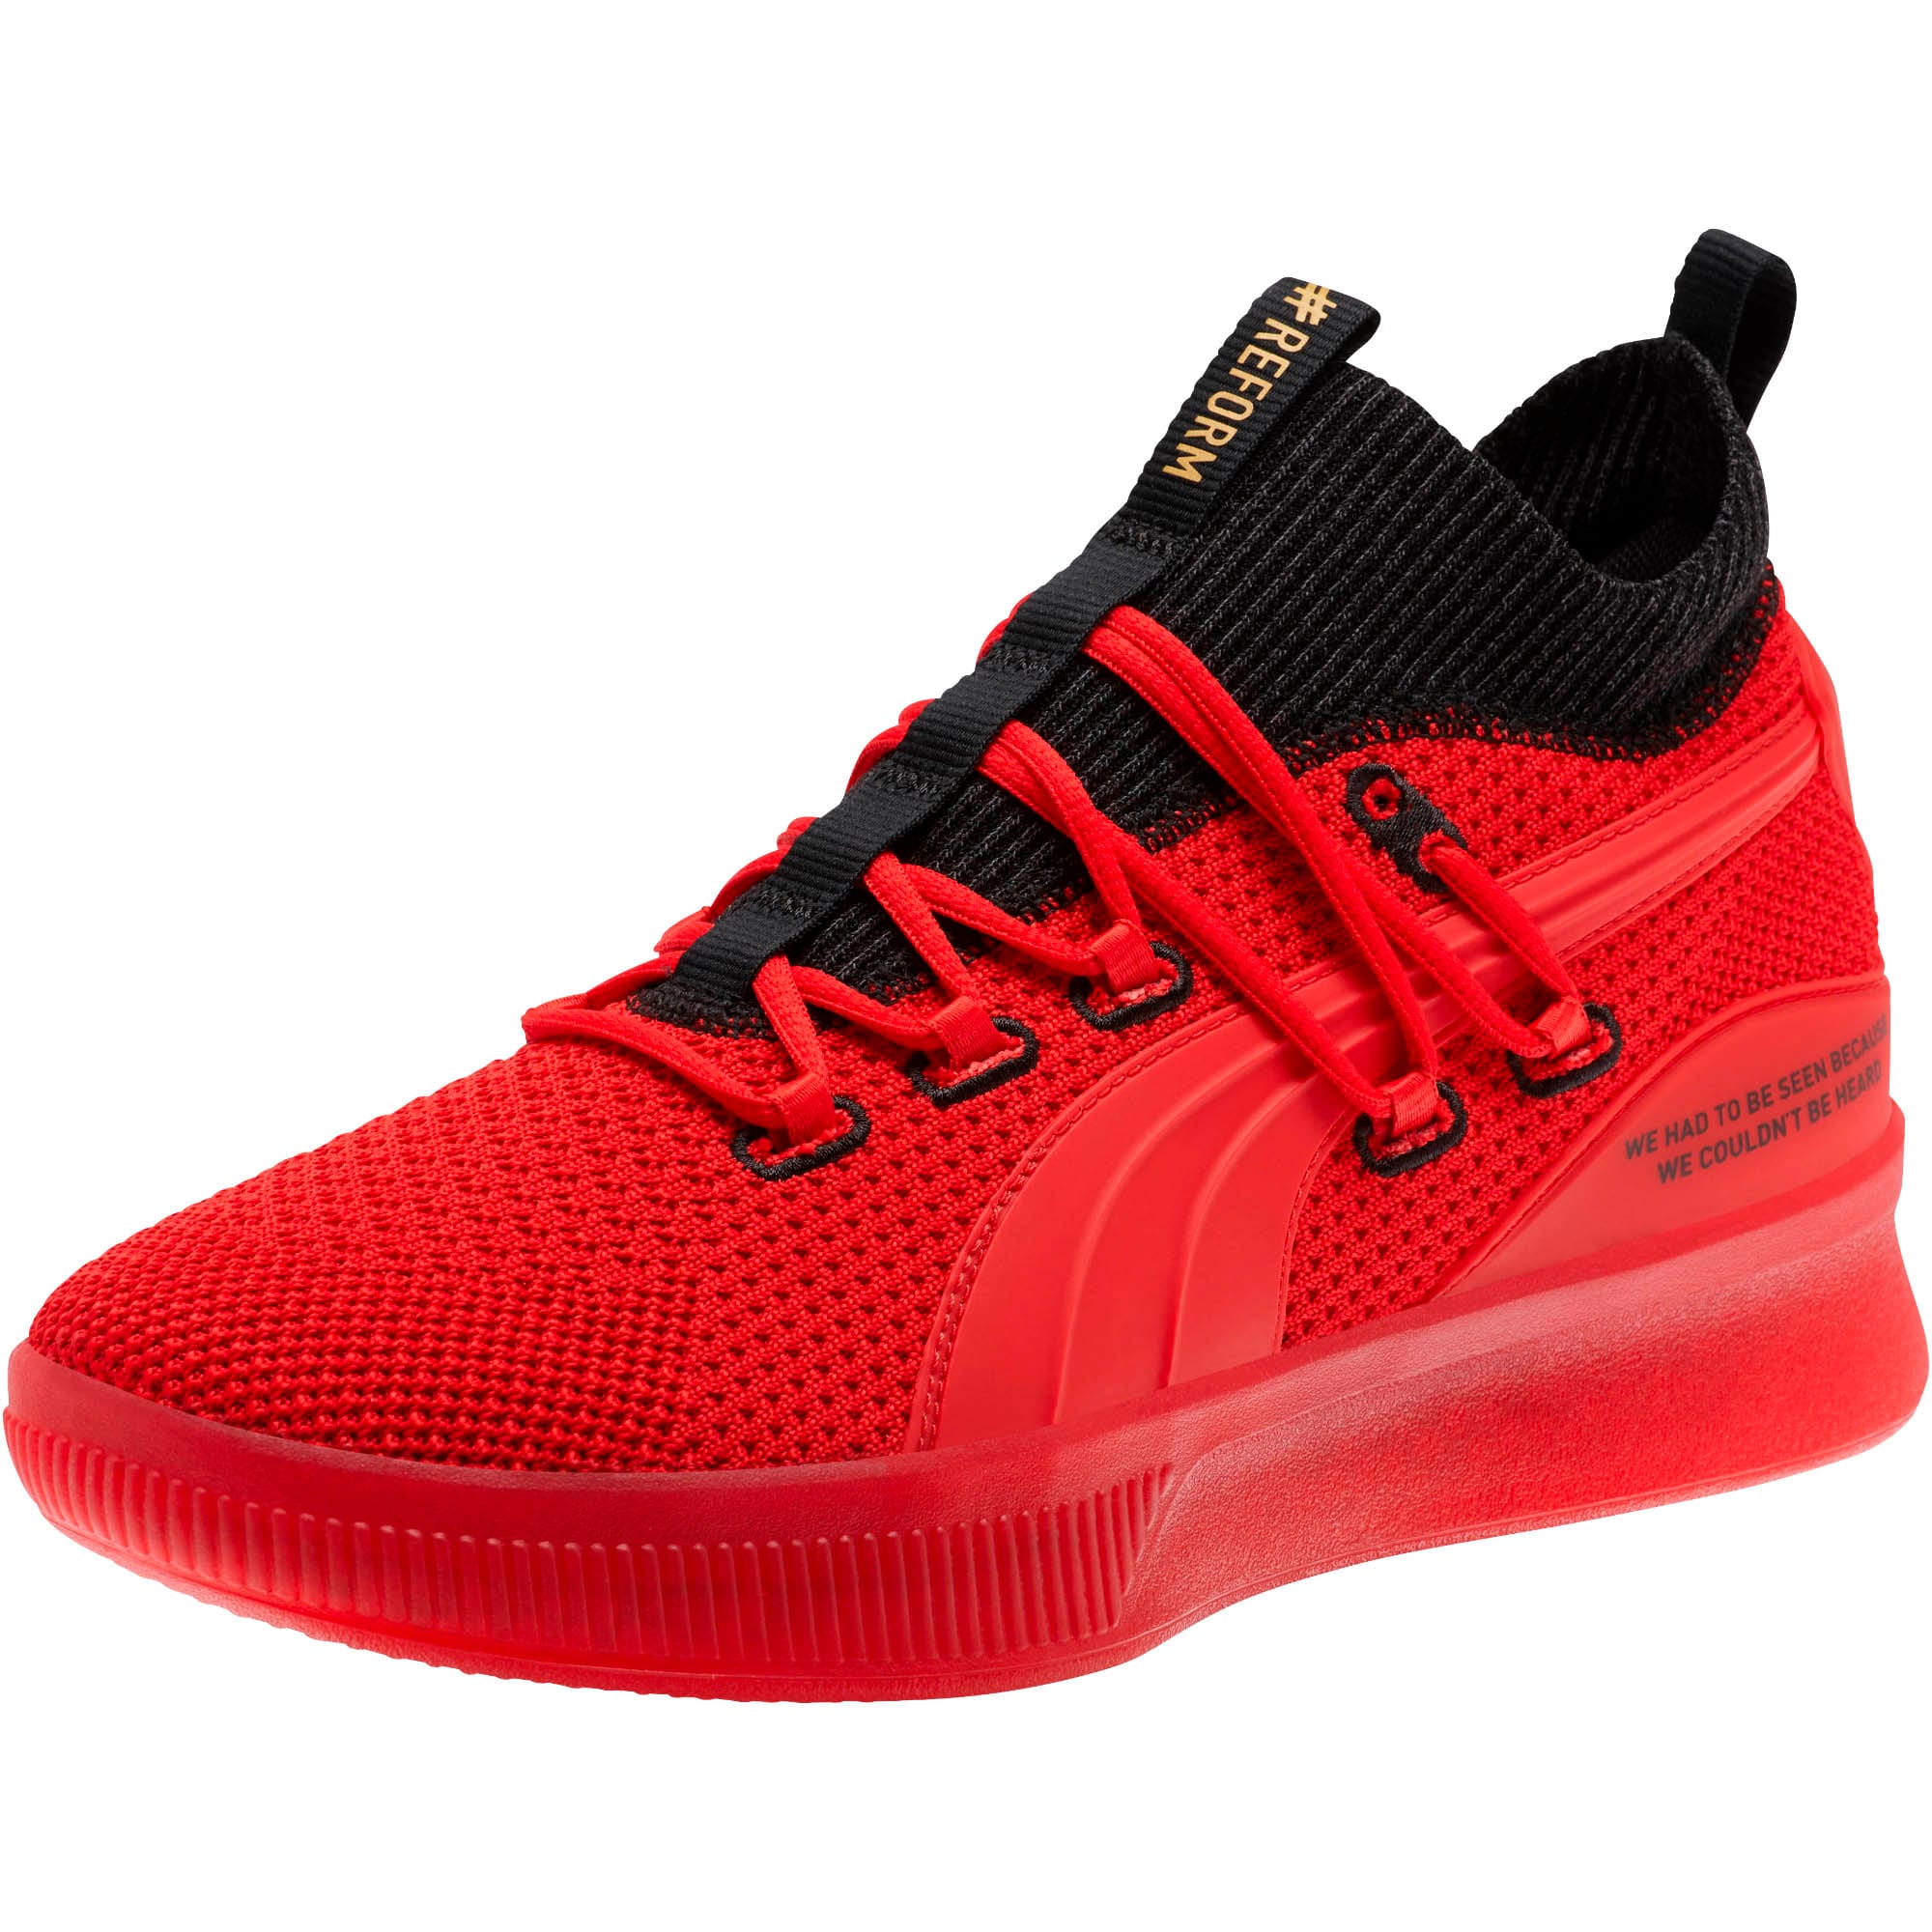 all red puma shoes